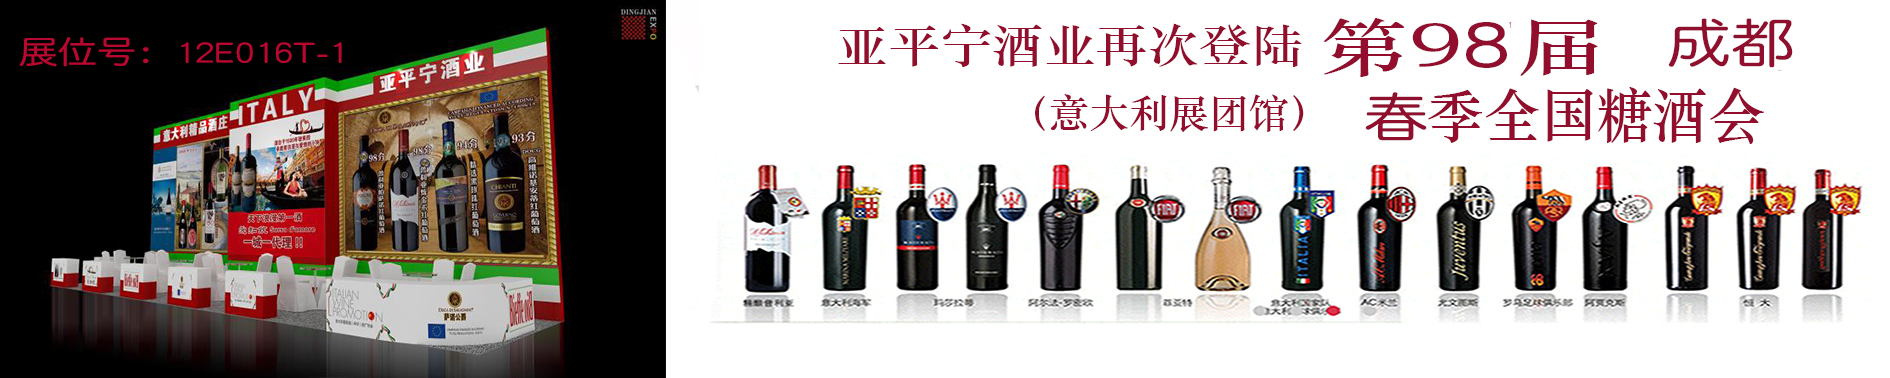 The 98th China Food and Drinks Fair ＂